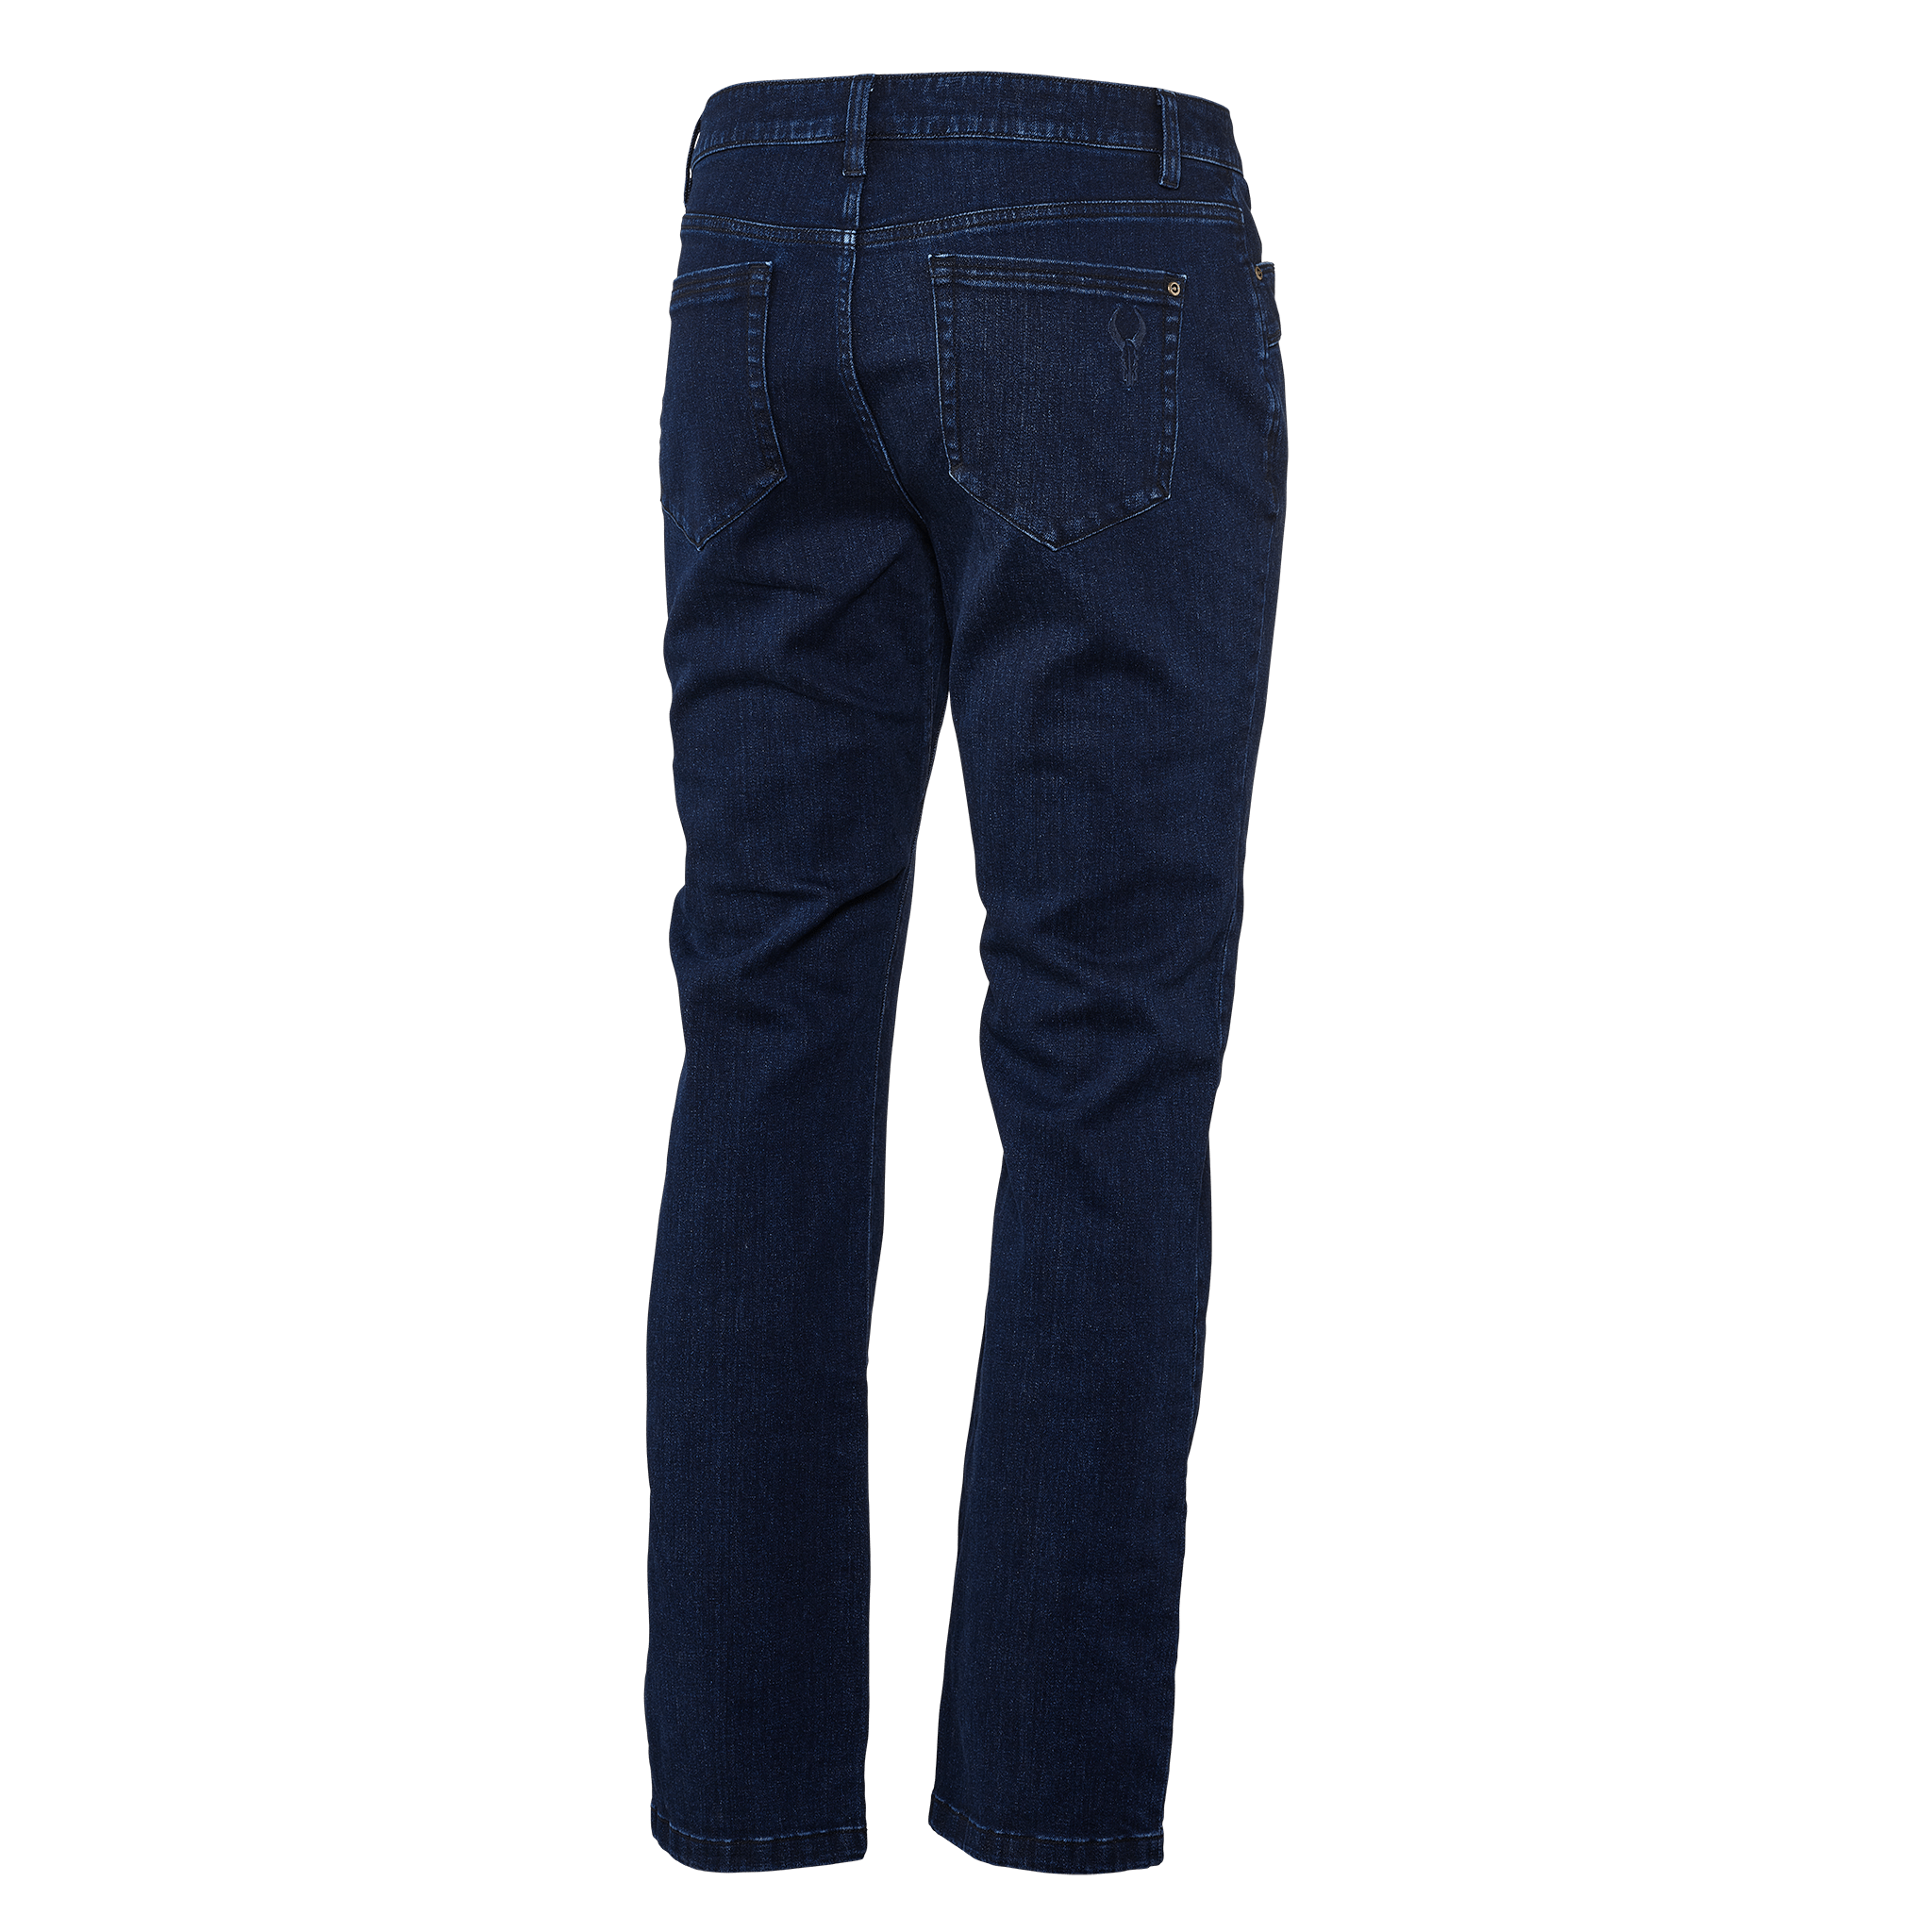 Mechanic Cargo Jeans : Made To Measure Custom Jeans For Men & Women,  MakeYourOwnJeans®